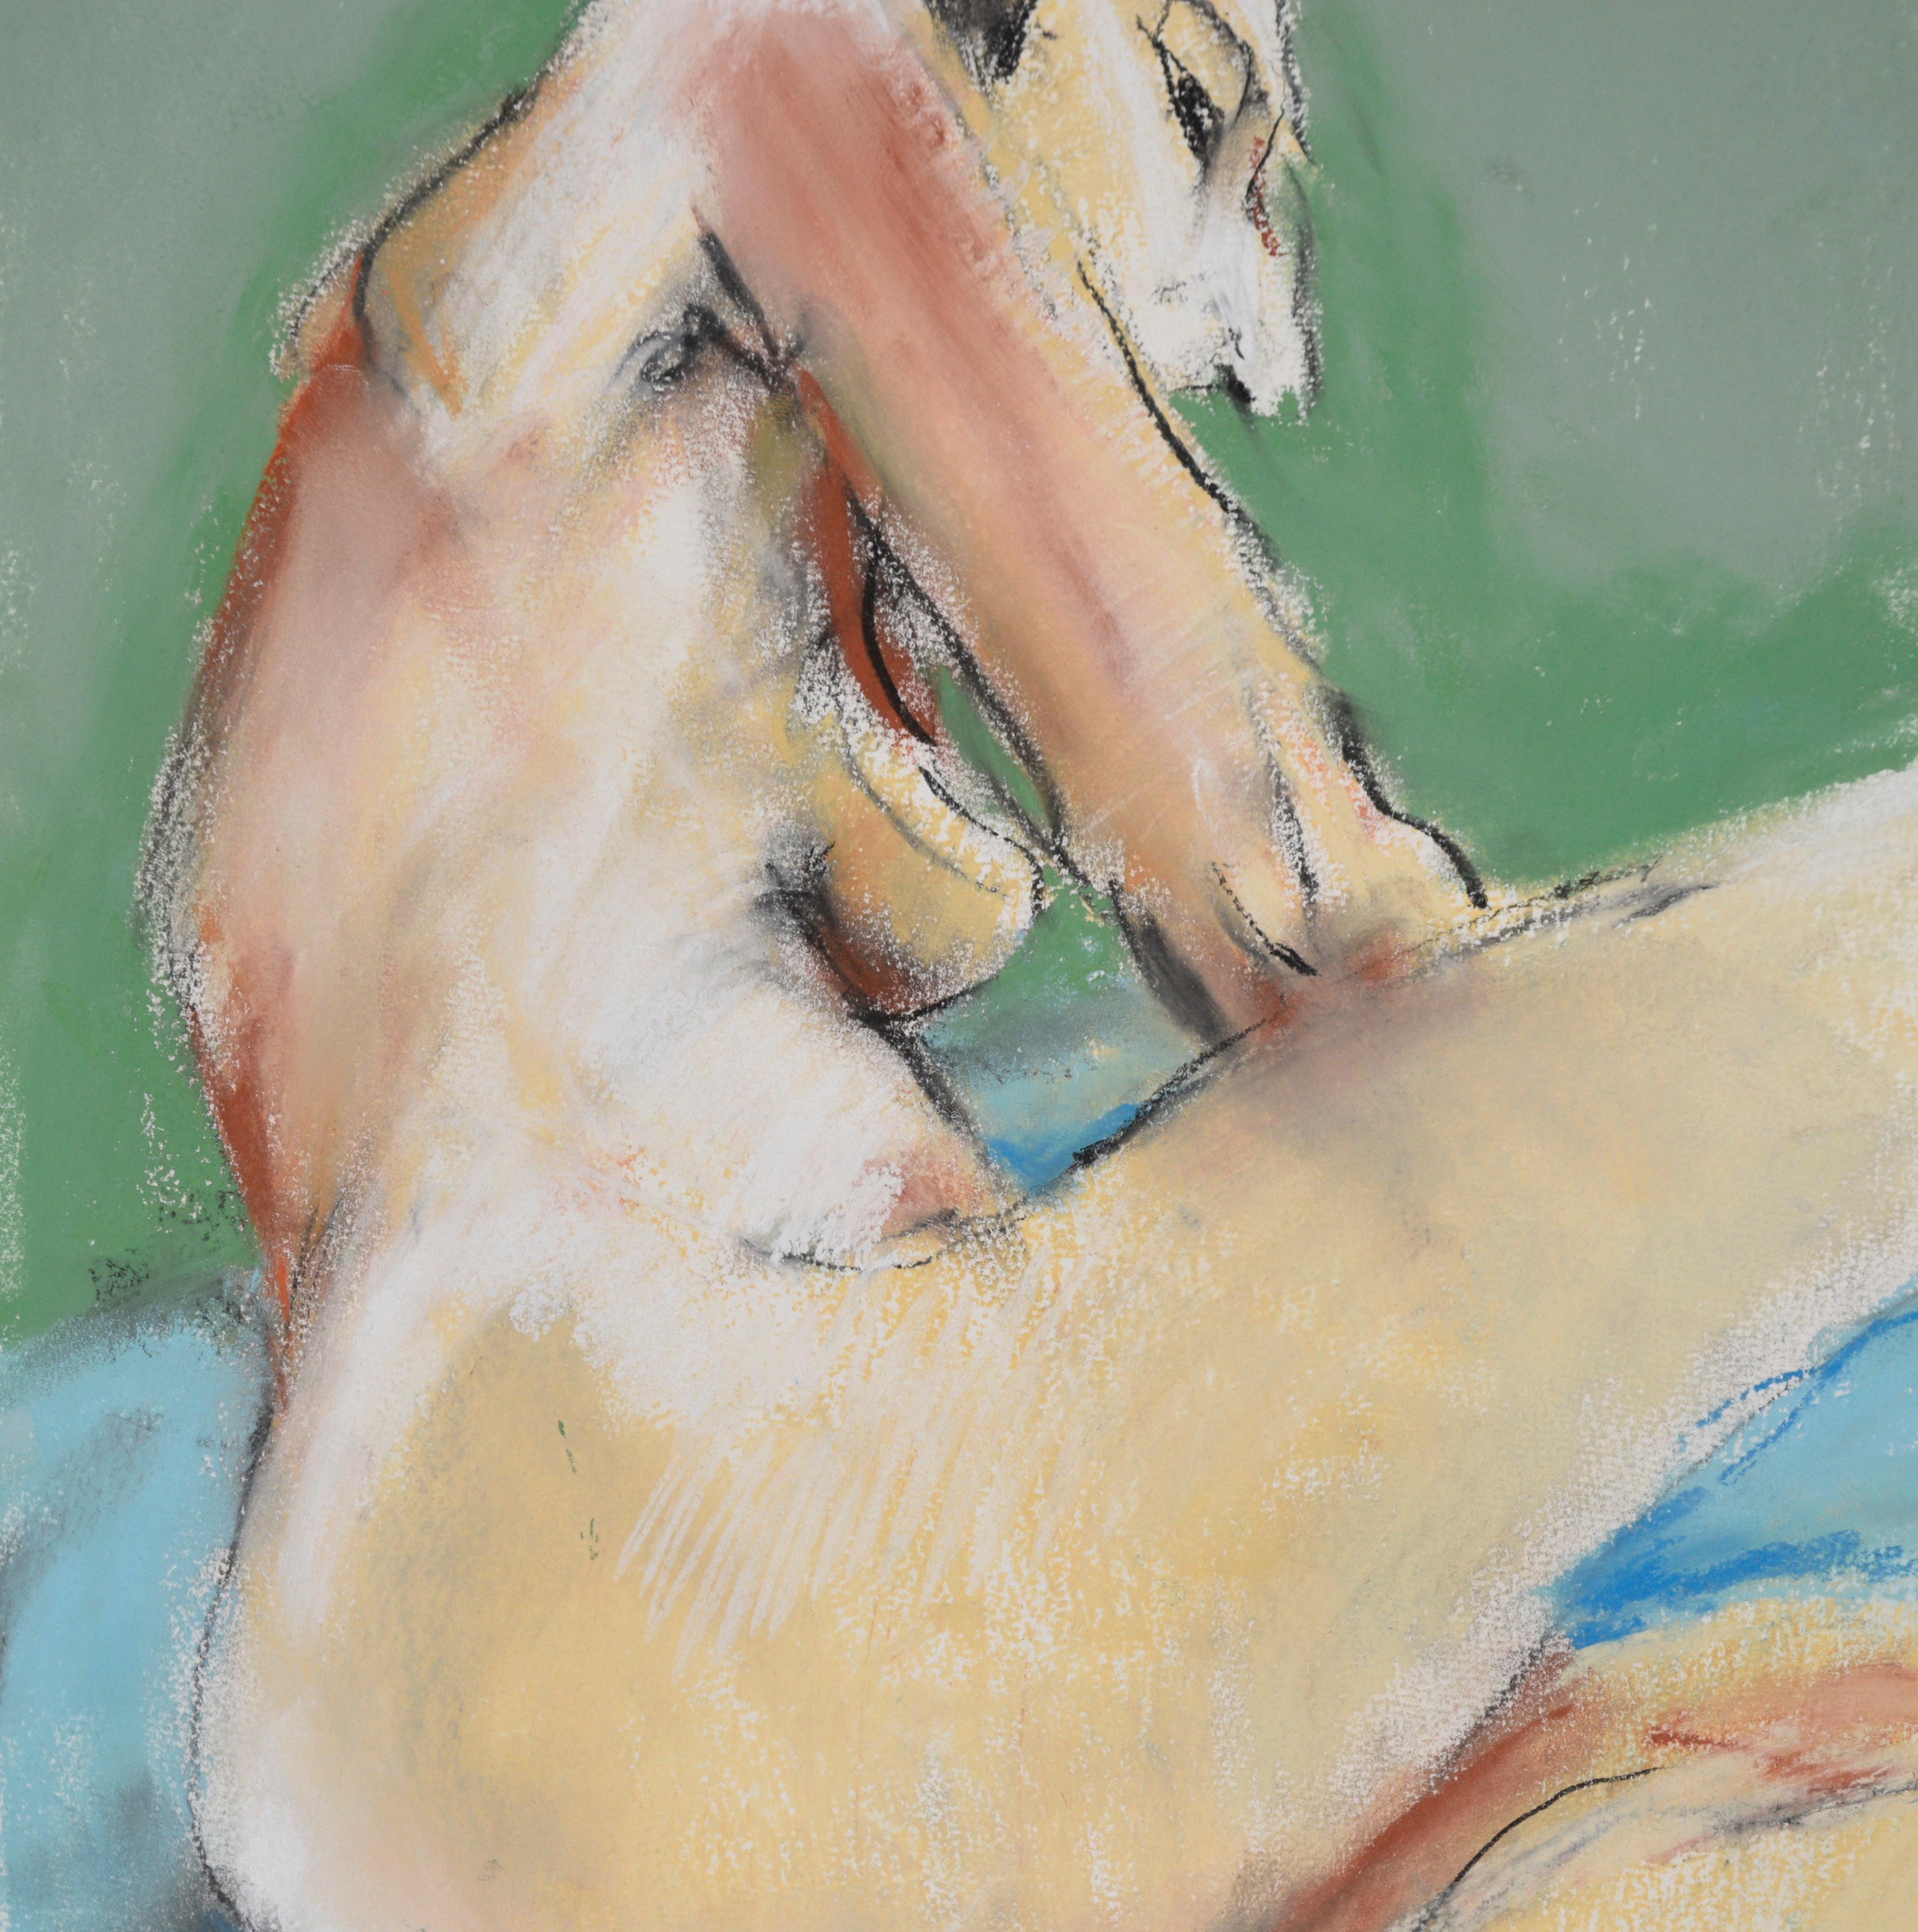 Bay Area Abstract Expressionist - Nude Study of A Woman

Abstract expressionist nude study of a brunette woman. The woman is posed, with one leg across the other, leaning on her right hand. She is looking down, her left hand crossed over her knee.